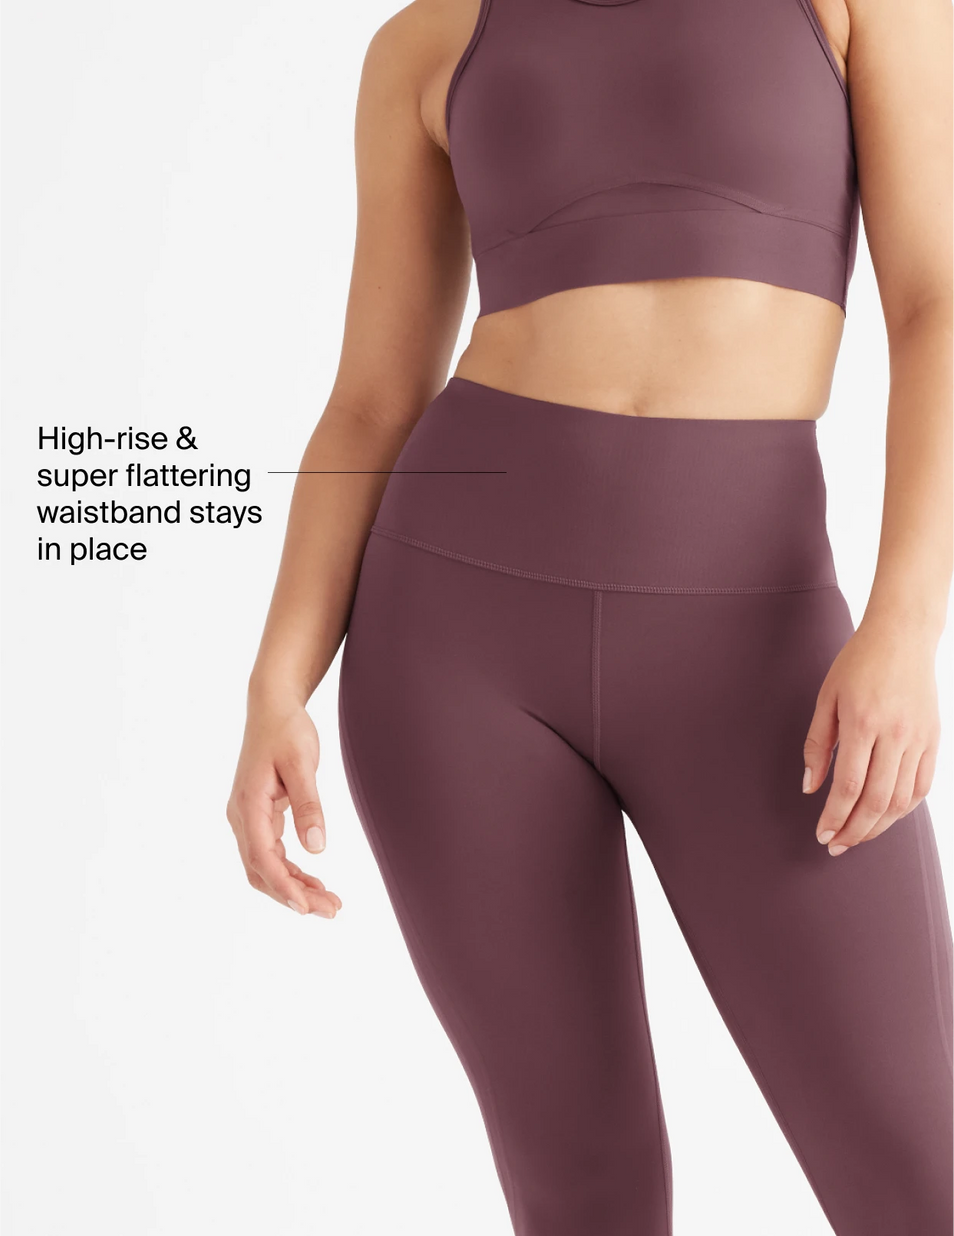 High-rise and super flattering waistband stays in place 